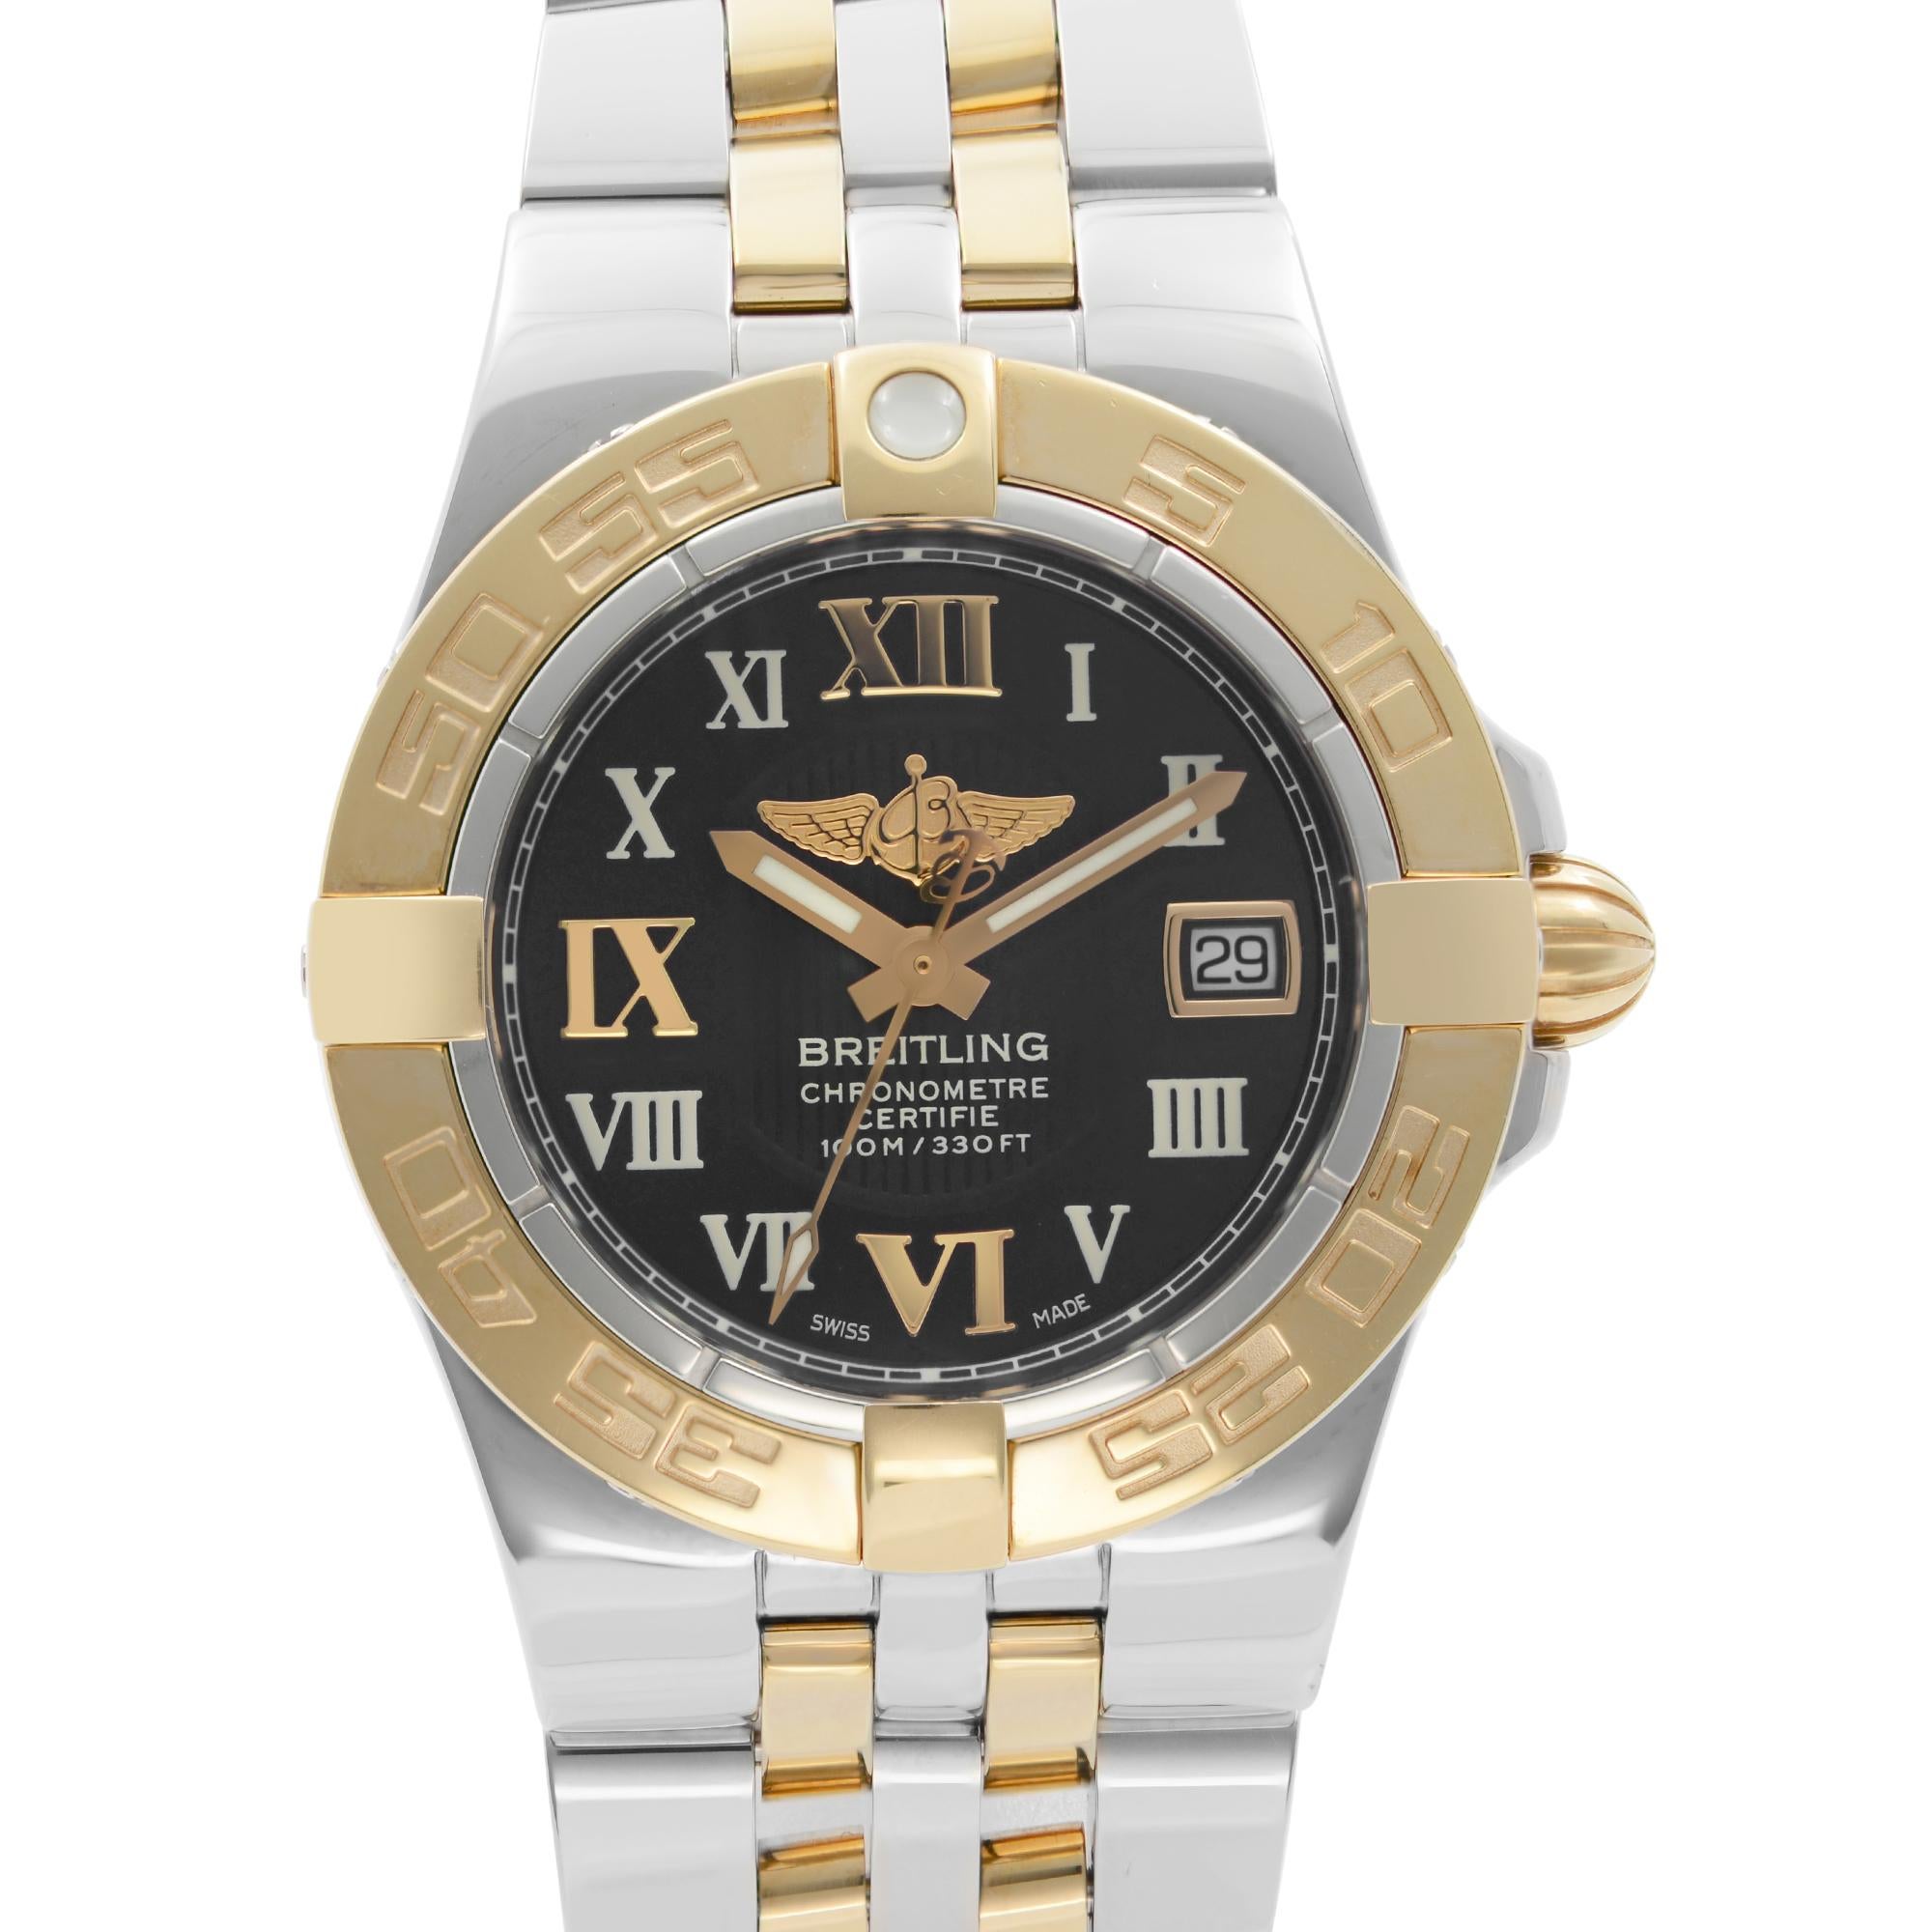 Store display Model  Breitling Galactic 30 18K Rose Gold Steel Quartz Ladies Watch C71340L2/B952-368C. This Beautiful Timepiece Features: 18kt Rose Gold And Stainless Steel Case With An 18kt Rose Gold And Stainless Steel Bracelet, Uni-Directional